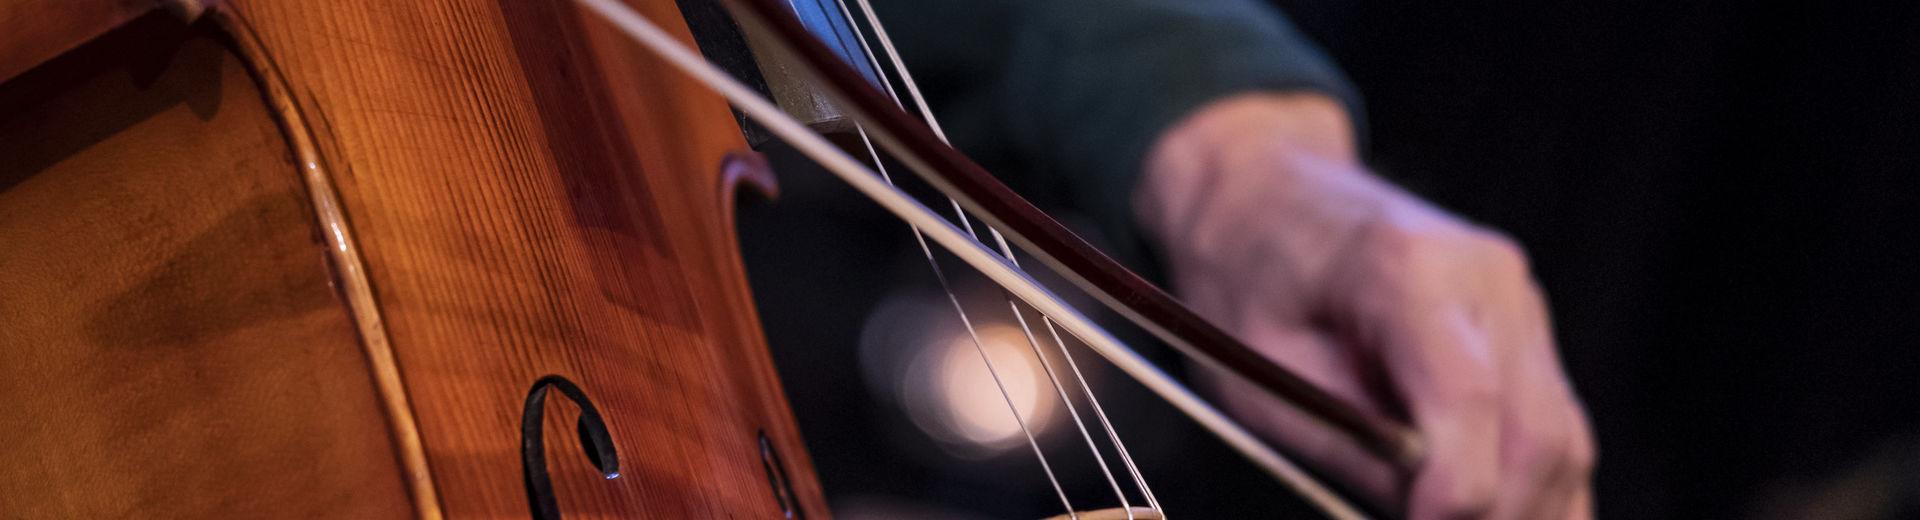 Close up image of a student playing the cello in a performance.